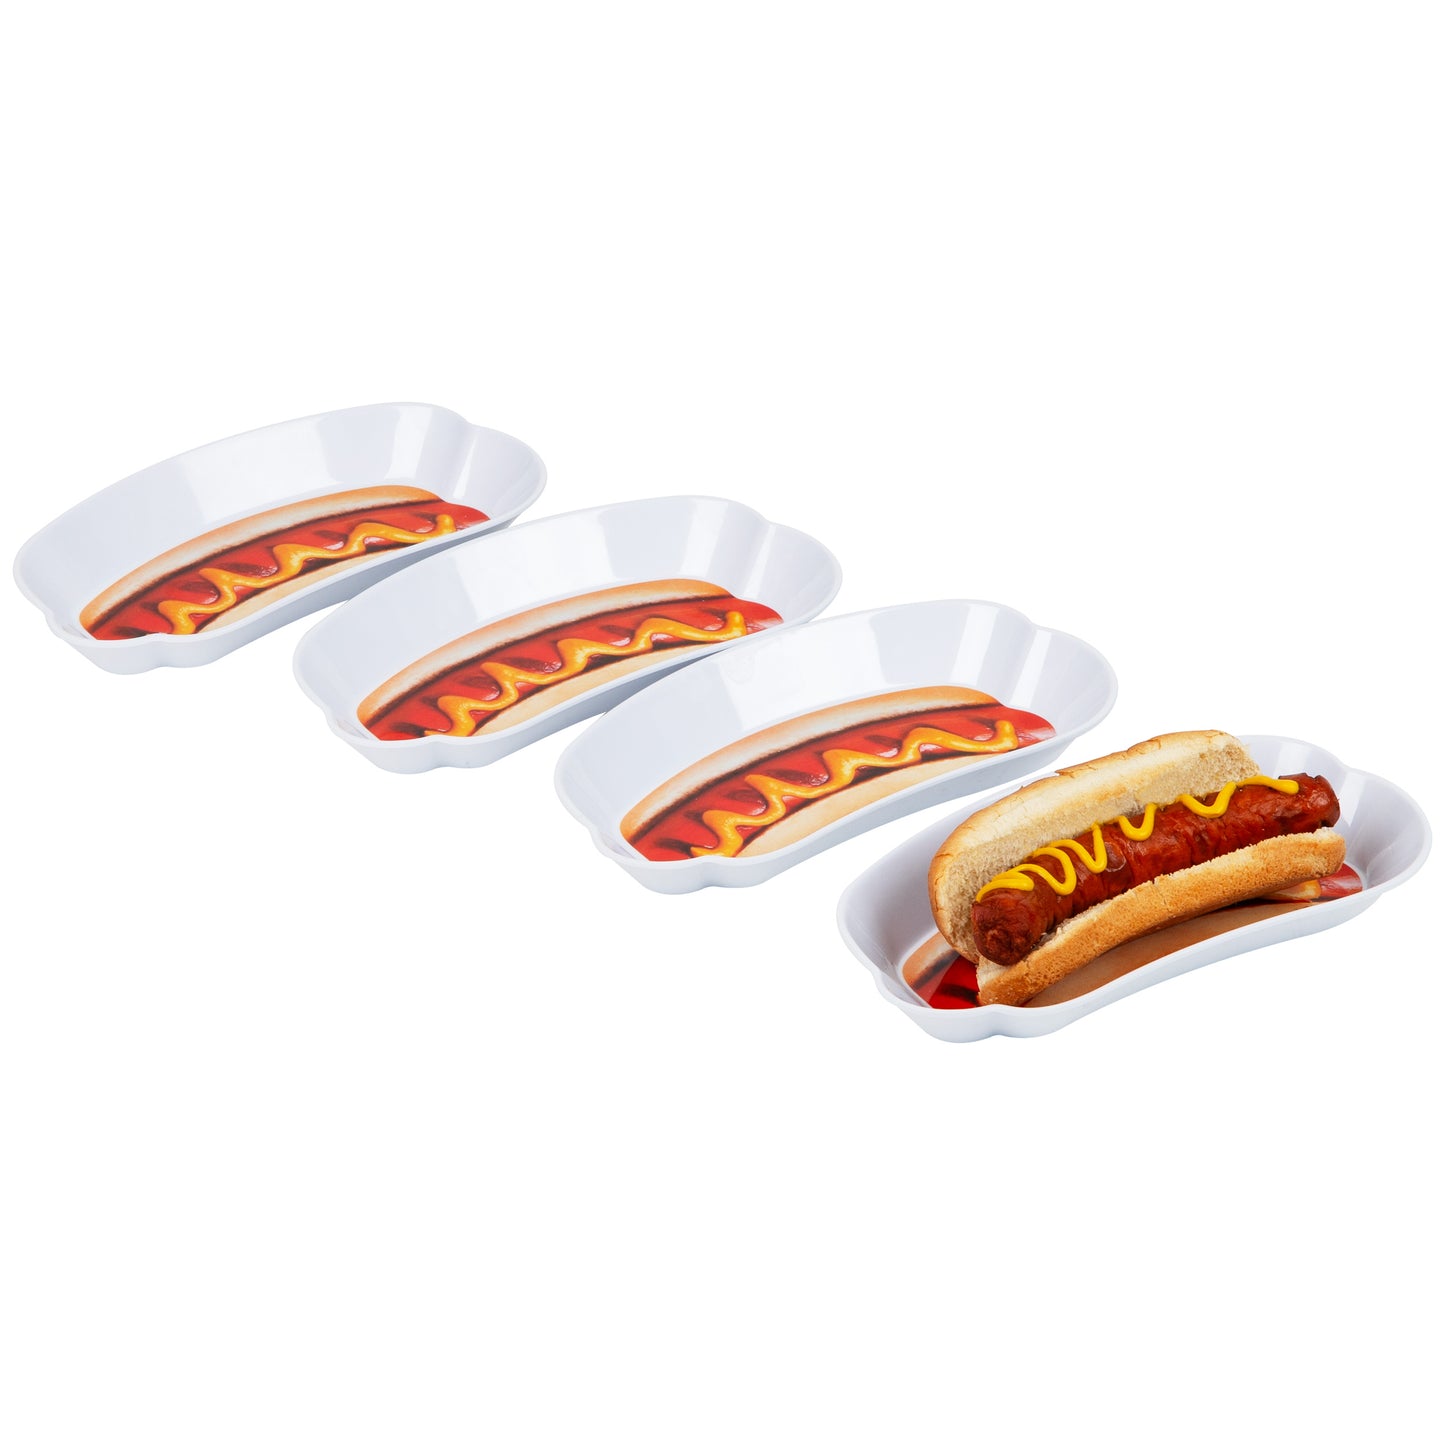 Mind Reader Bon Appetit Collection, Hot Dog Serving Plates for Parties and BBQs, 4 Piece Set, Melamine, 8.5"L x 4.5"W x 1"H, White